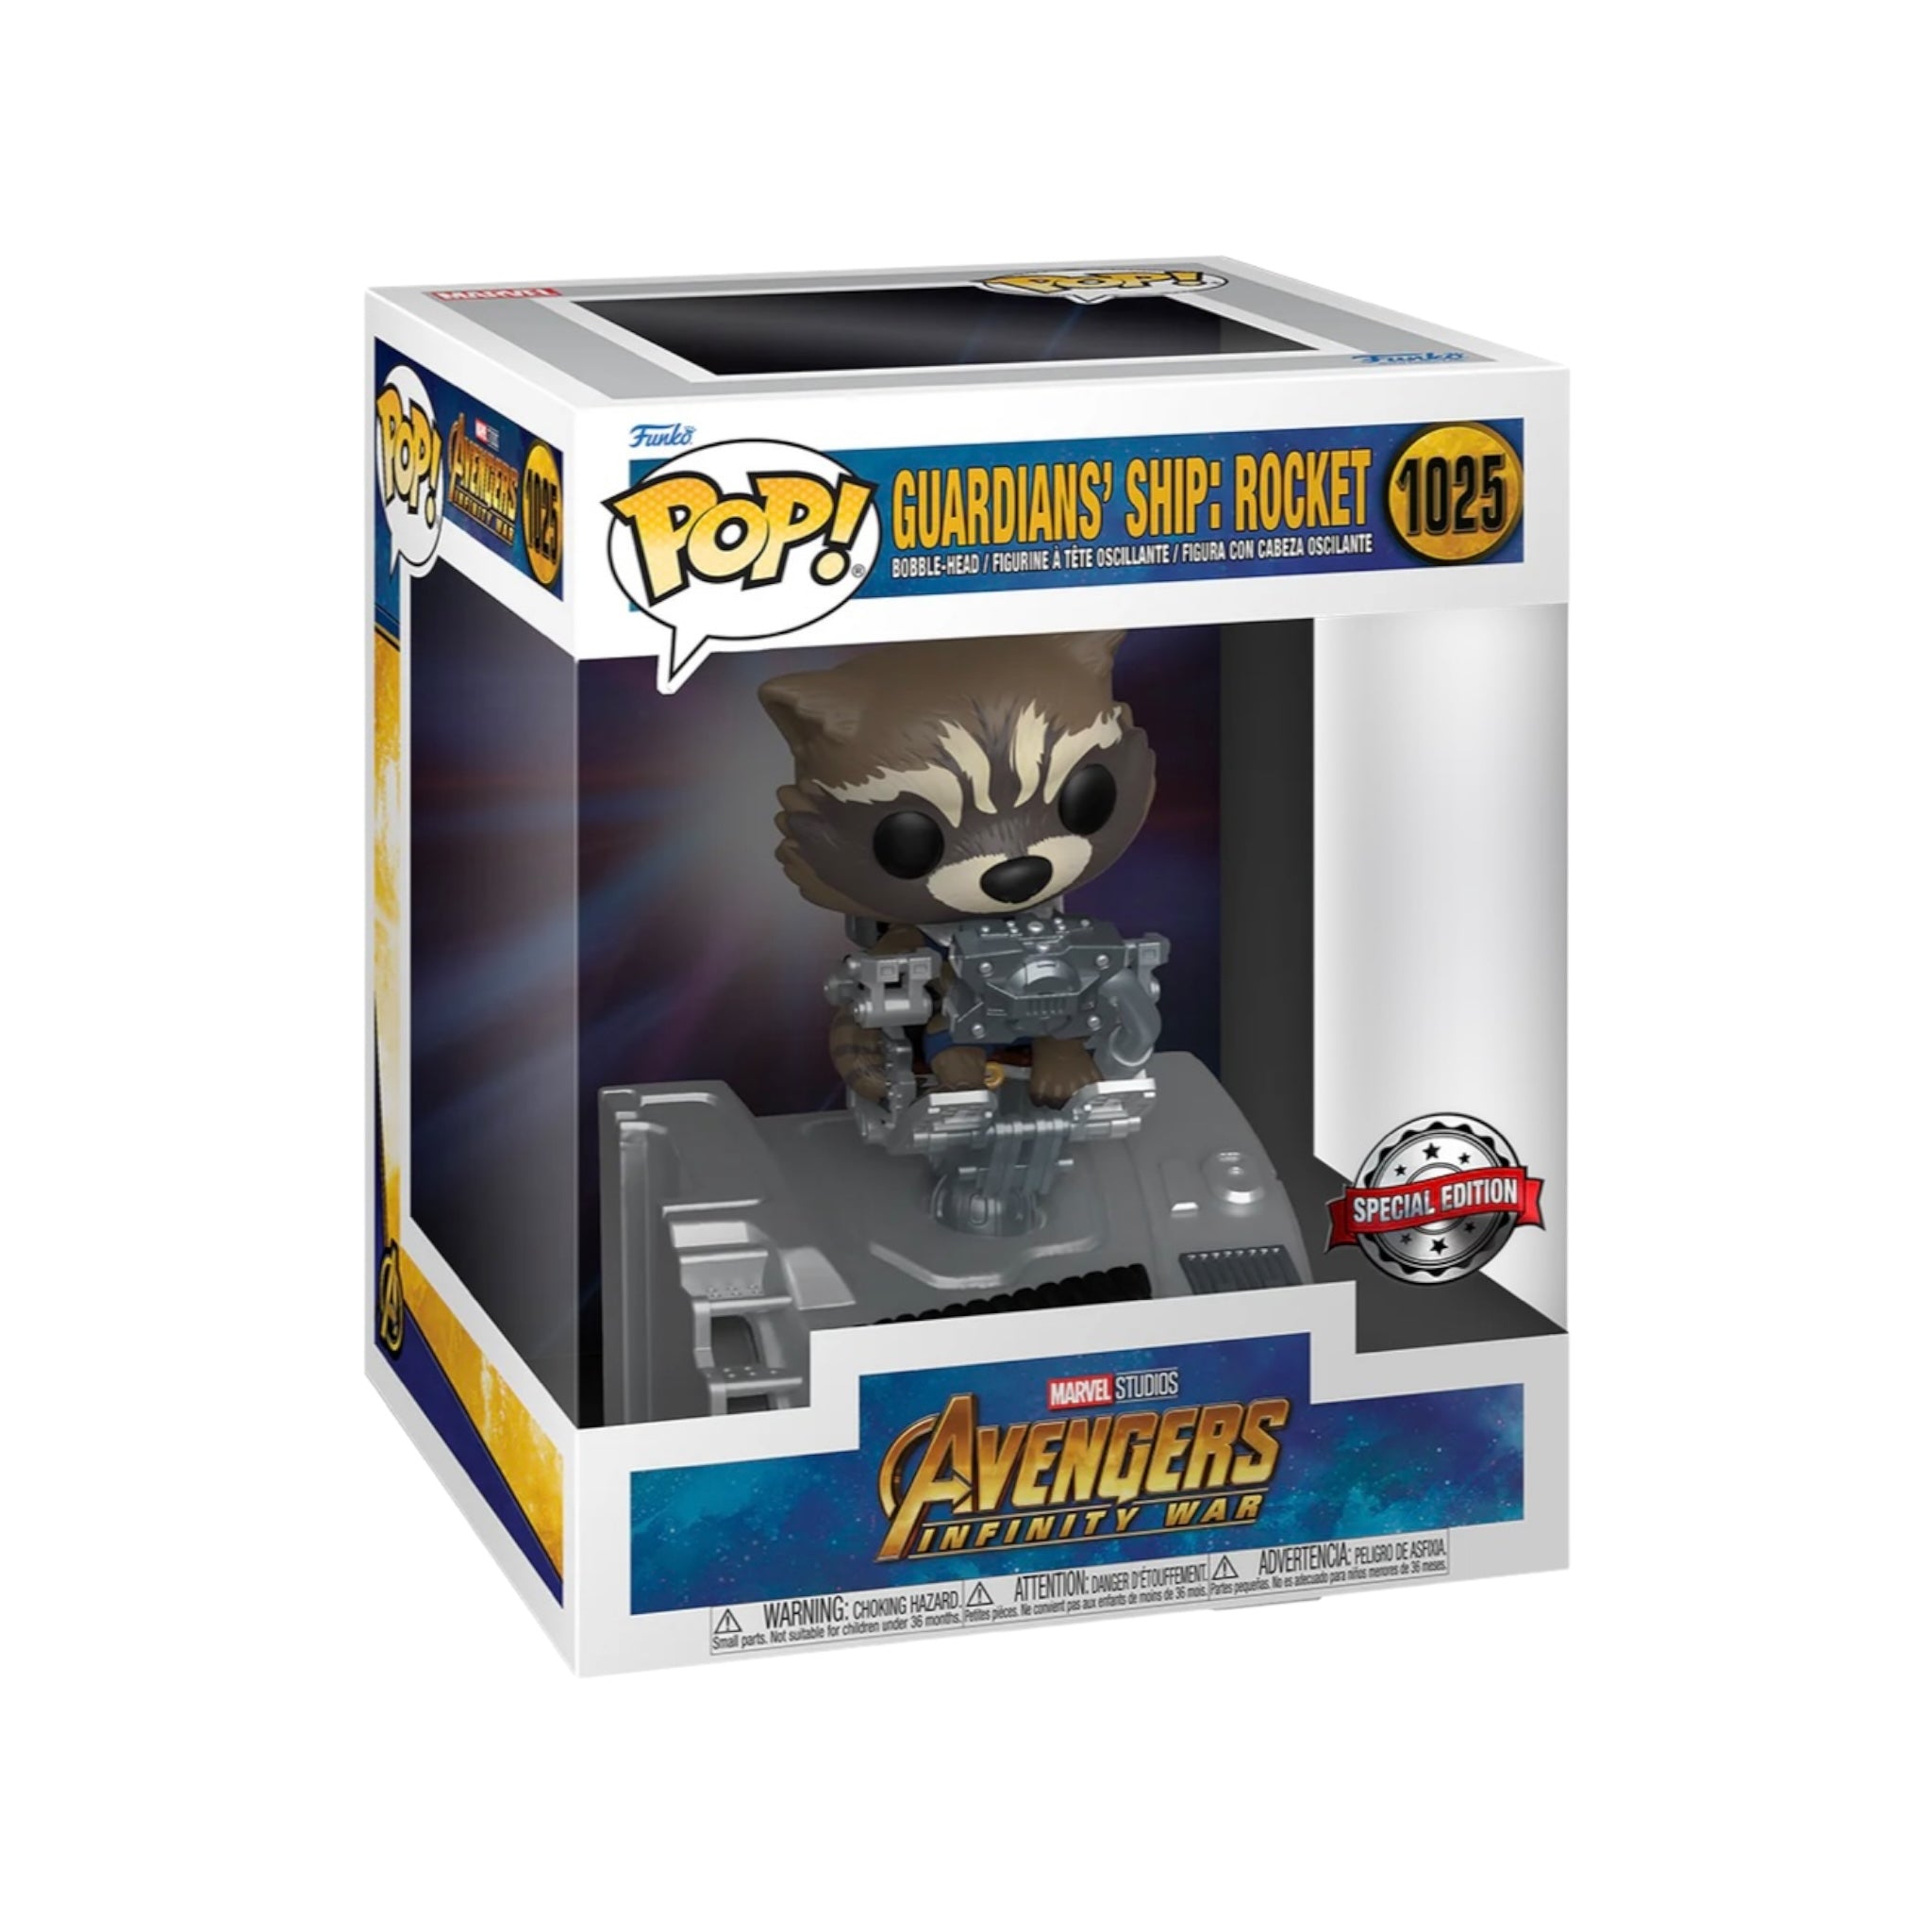 Guardians' Ship: Rocket #1025 Deluxe Funko Pop! - Avengers: Infinity War - Special Edition - Condition 8.5/10